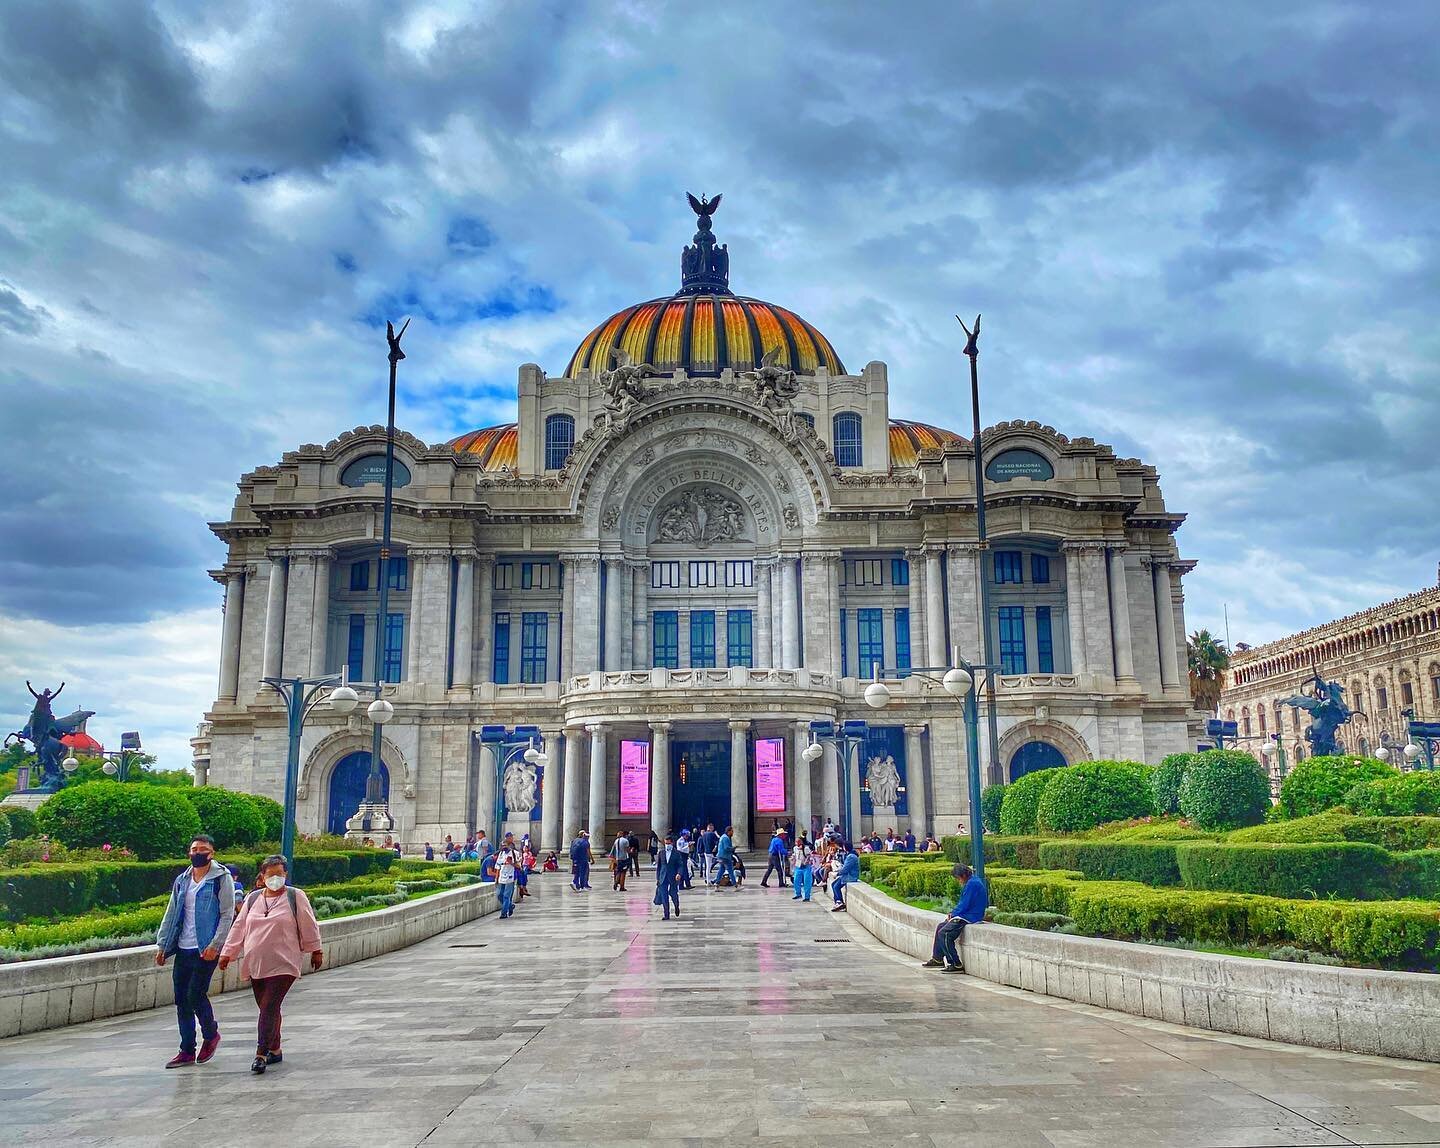 @palaciooficial is more than just a pretty building. Head inside for strange #murals by famous #artists, including #diegorivera and #orozco. They&rsquo;re also infamous, whether it&rsquo;s because they&rsquo;re #communist propaganda or feature a hide